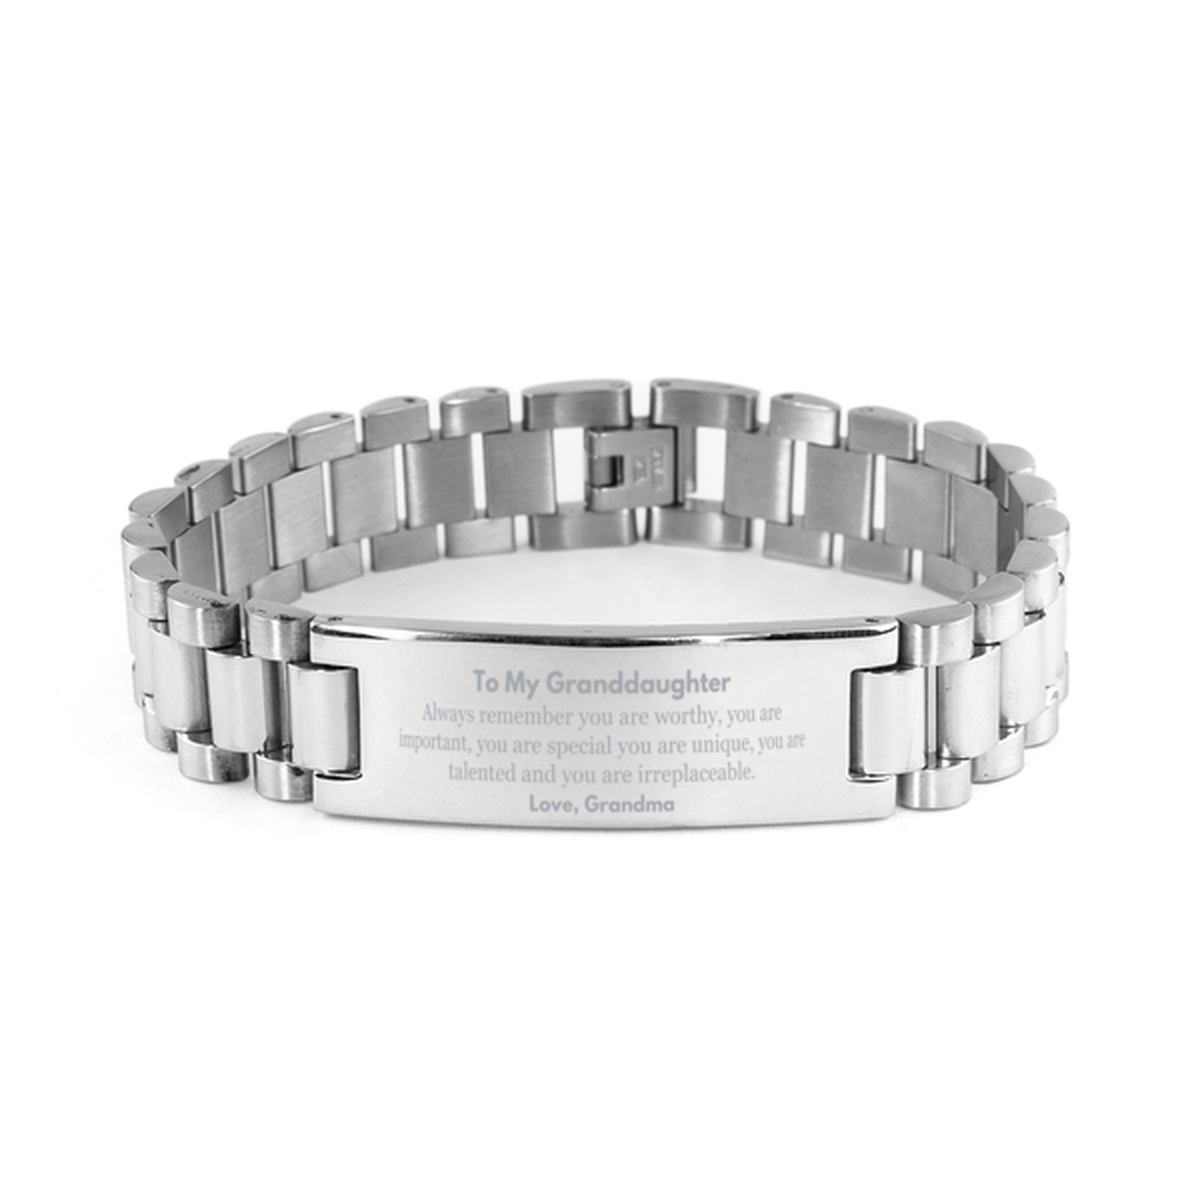 Granddaughter Birthday Gifts from Grandma, Inspirational Ladder Stainless Steel Bracelet for Granddaughter Christmas Graduation Gifts for Granddaughter Always remember you are worthy, you are important. Love, Grandma